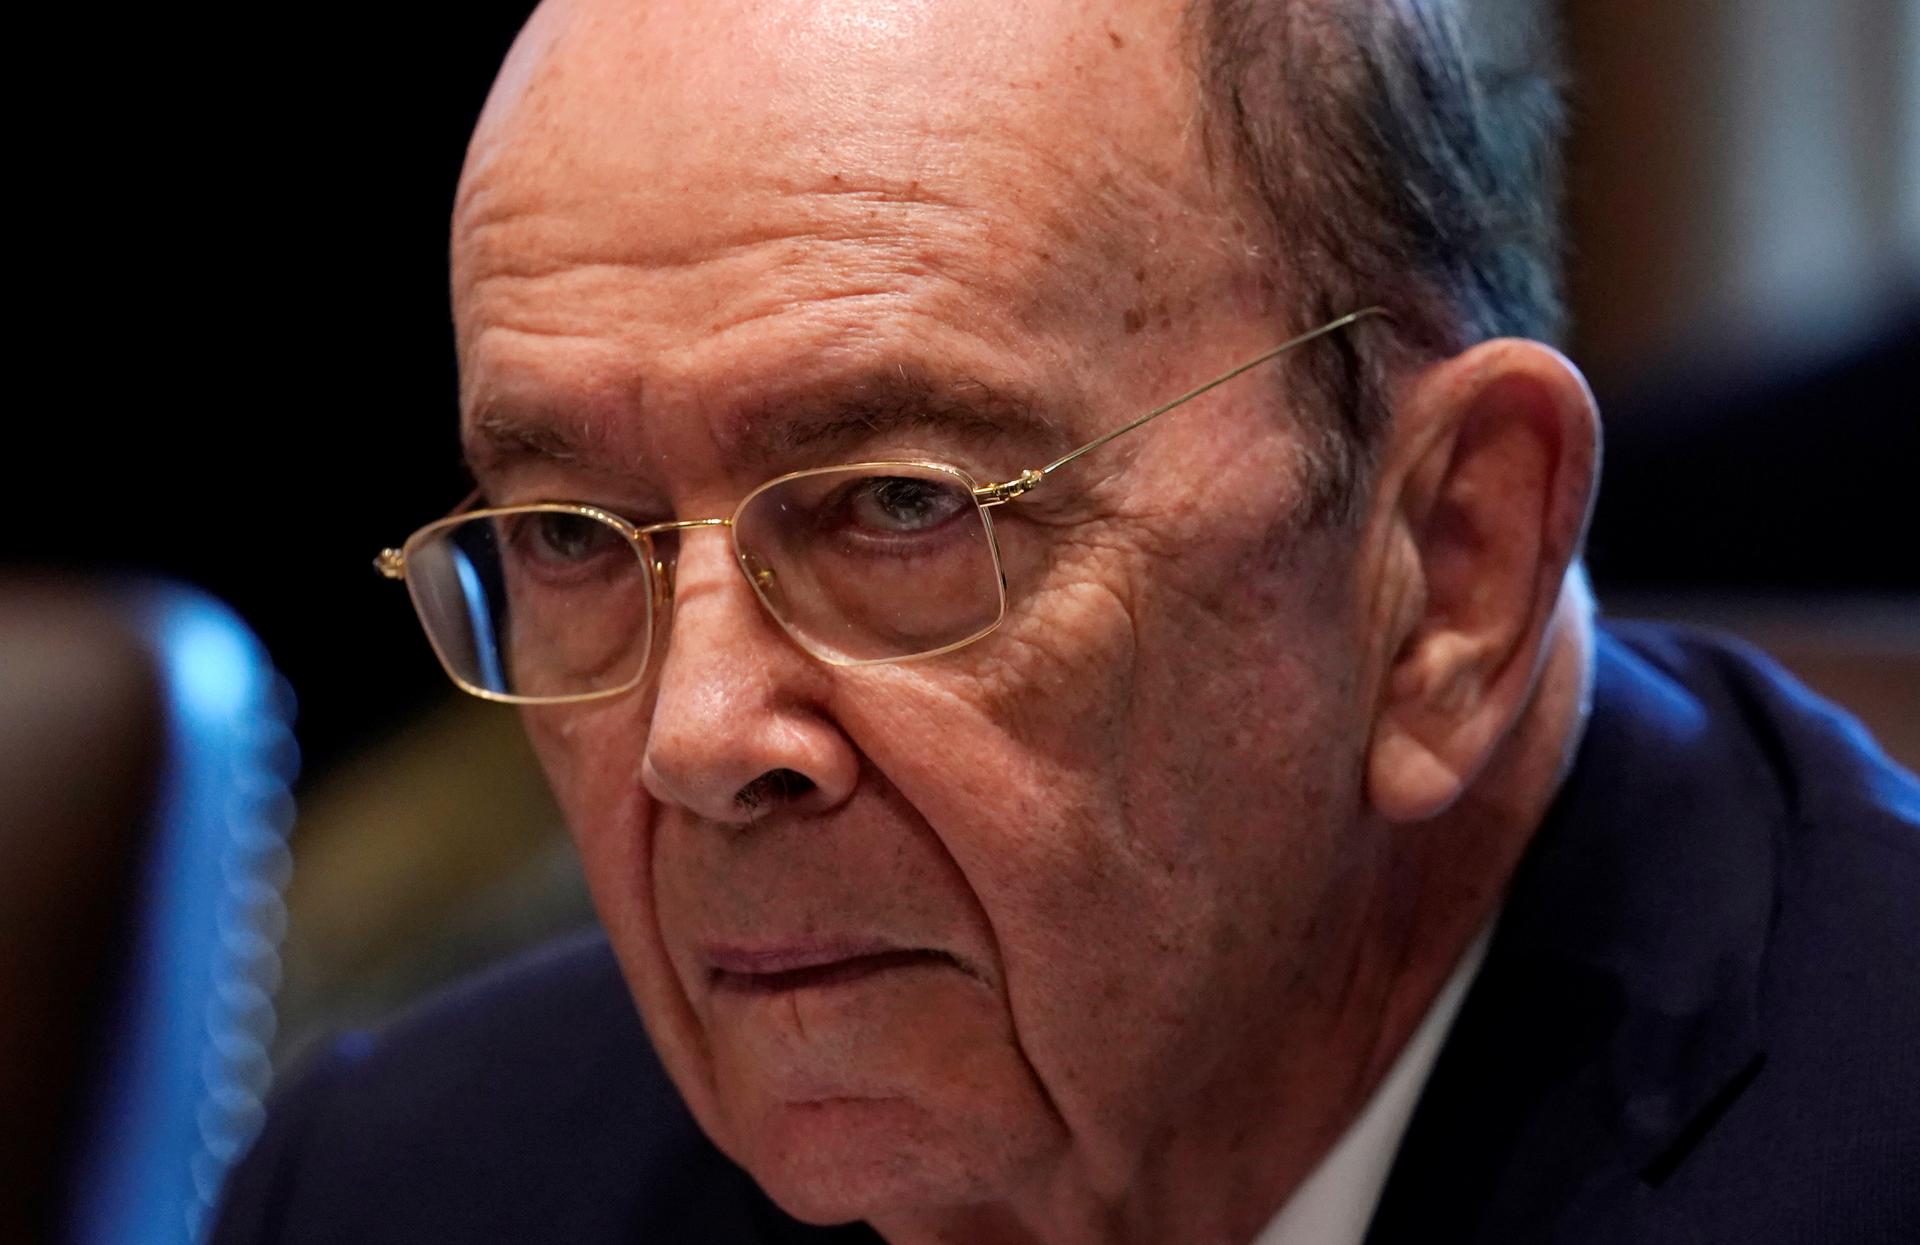 Democrats have called for an inquiry into Commerce Secretary Wilbur Ross's business links to Vladimir Putin's son-in-law. Ross denies wrongdoing.